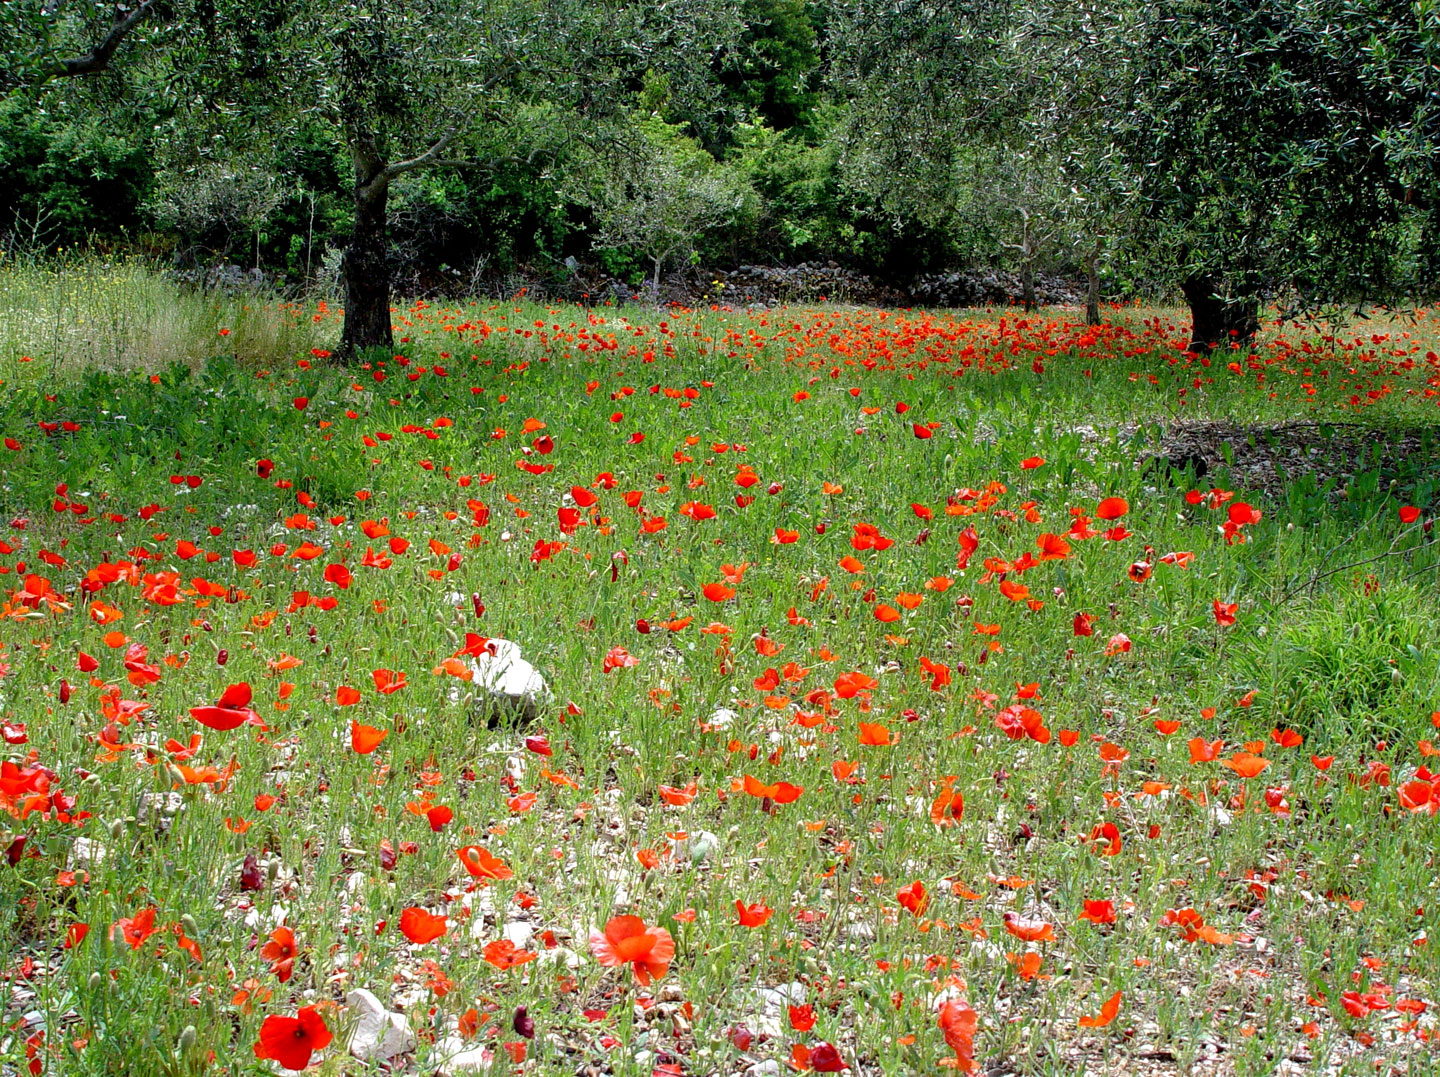 Field of poppies, spring in Lefkada